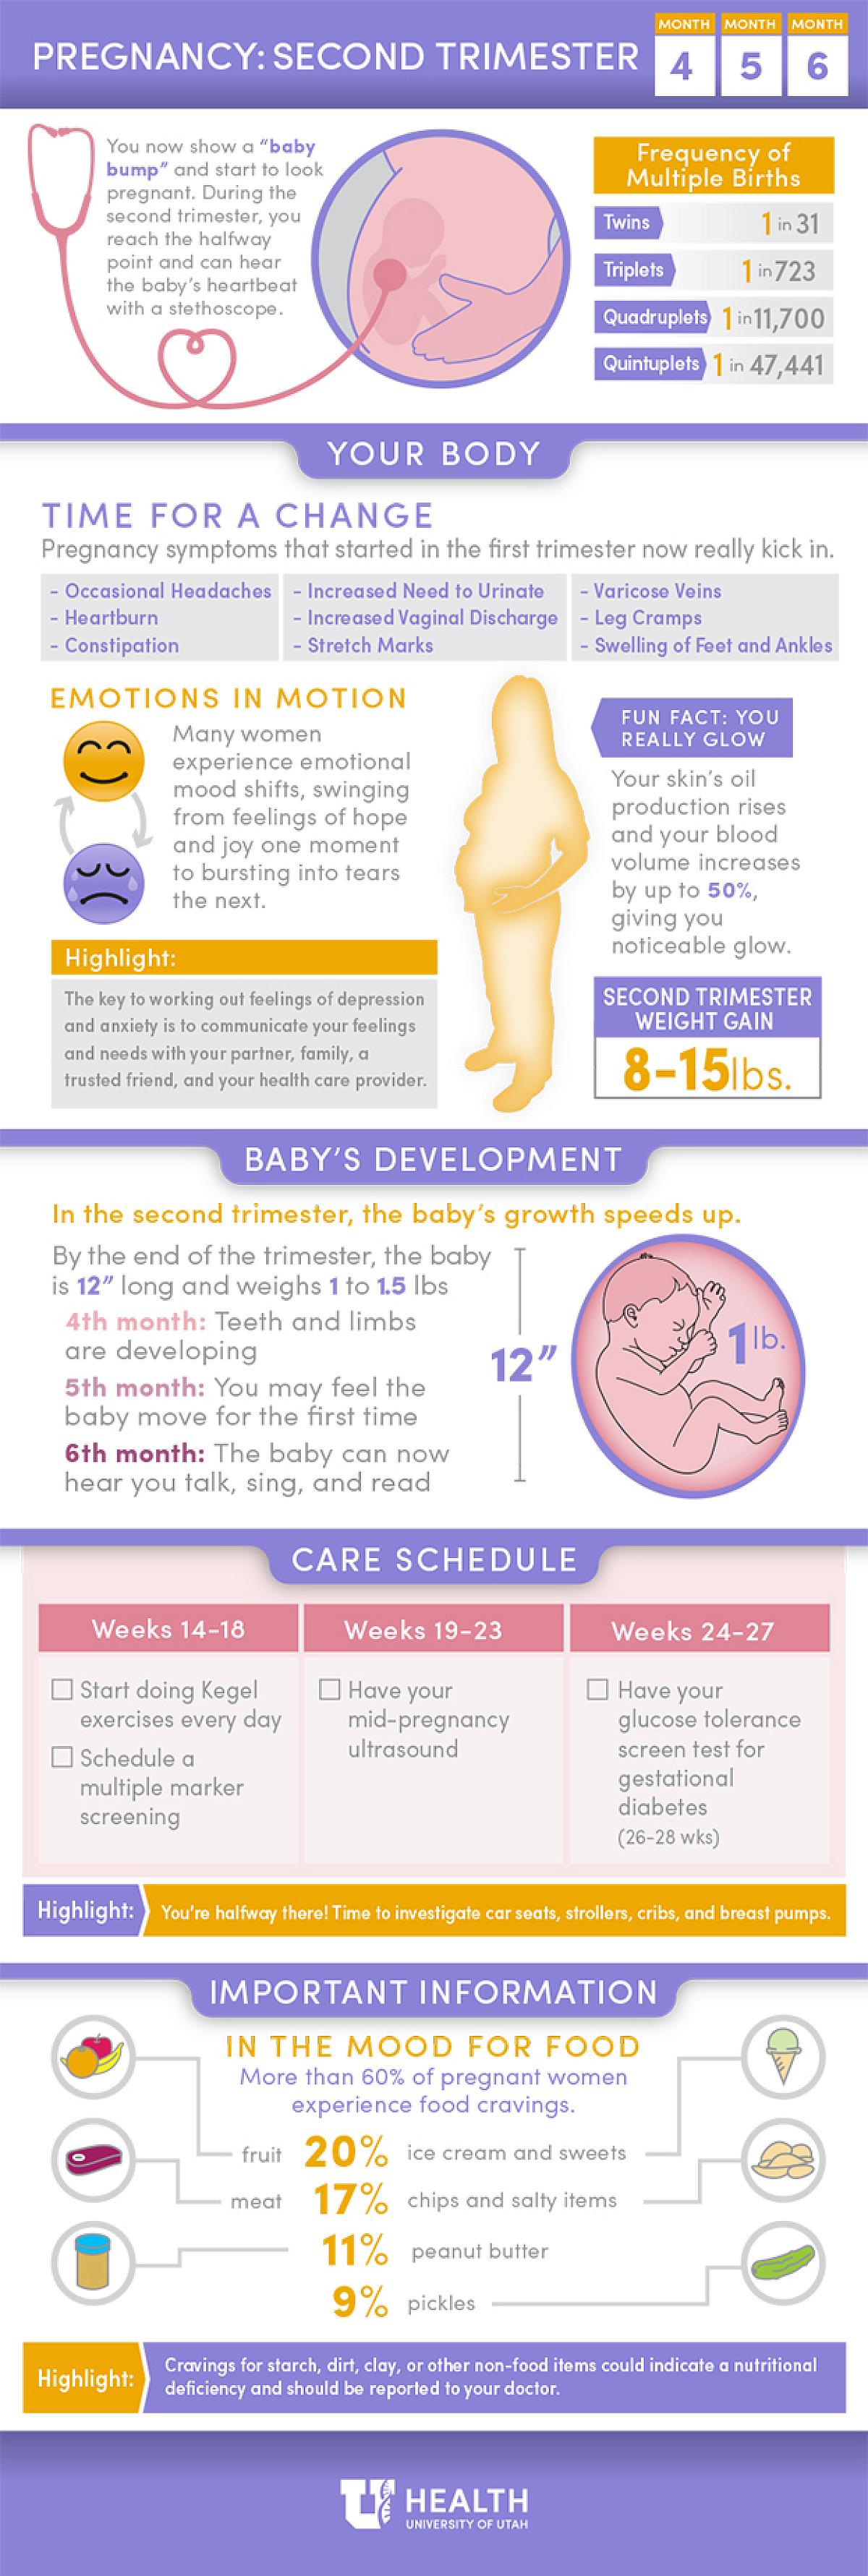 Women's Health Pregnancy 2nd Trimester Infographic 